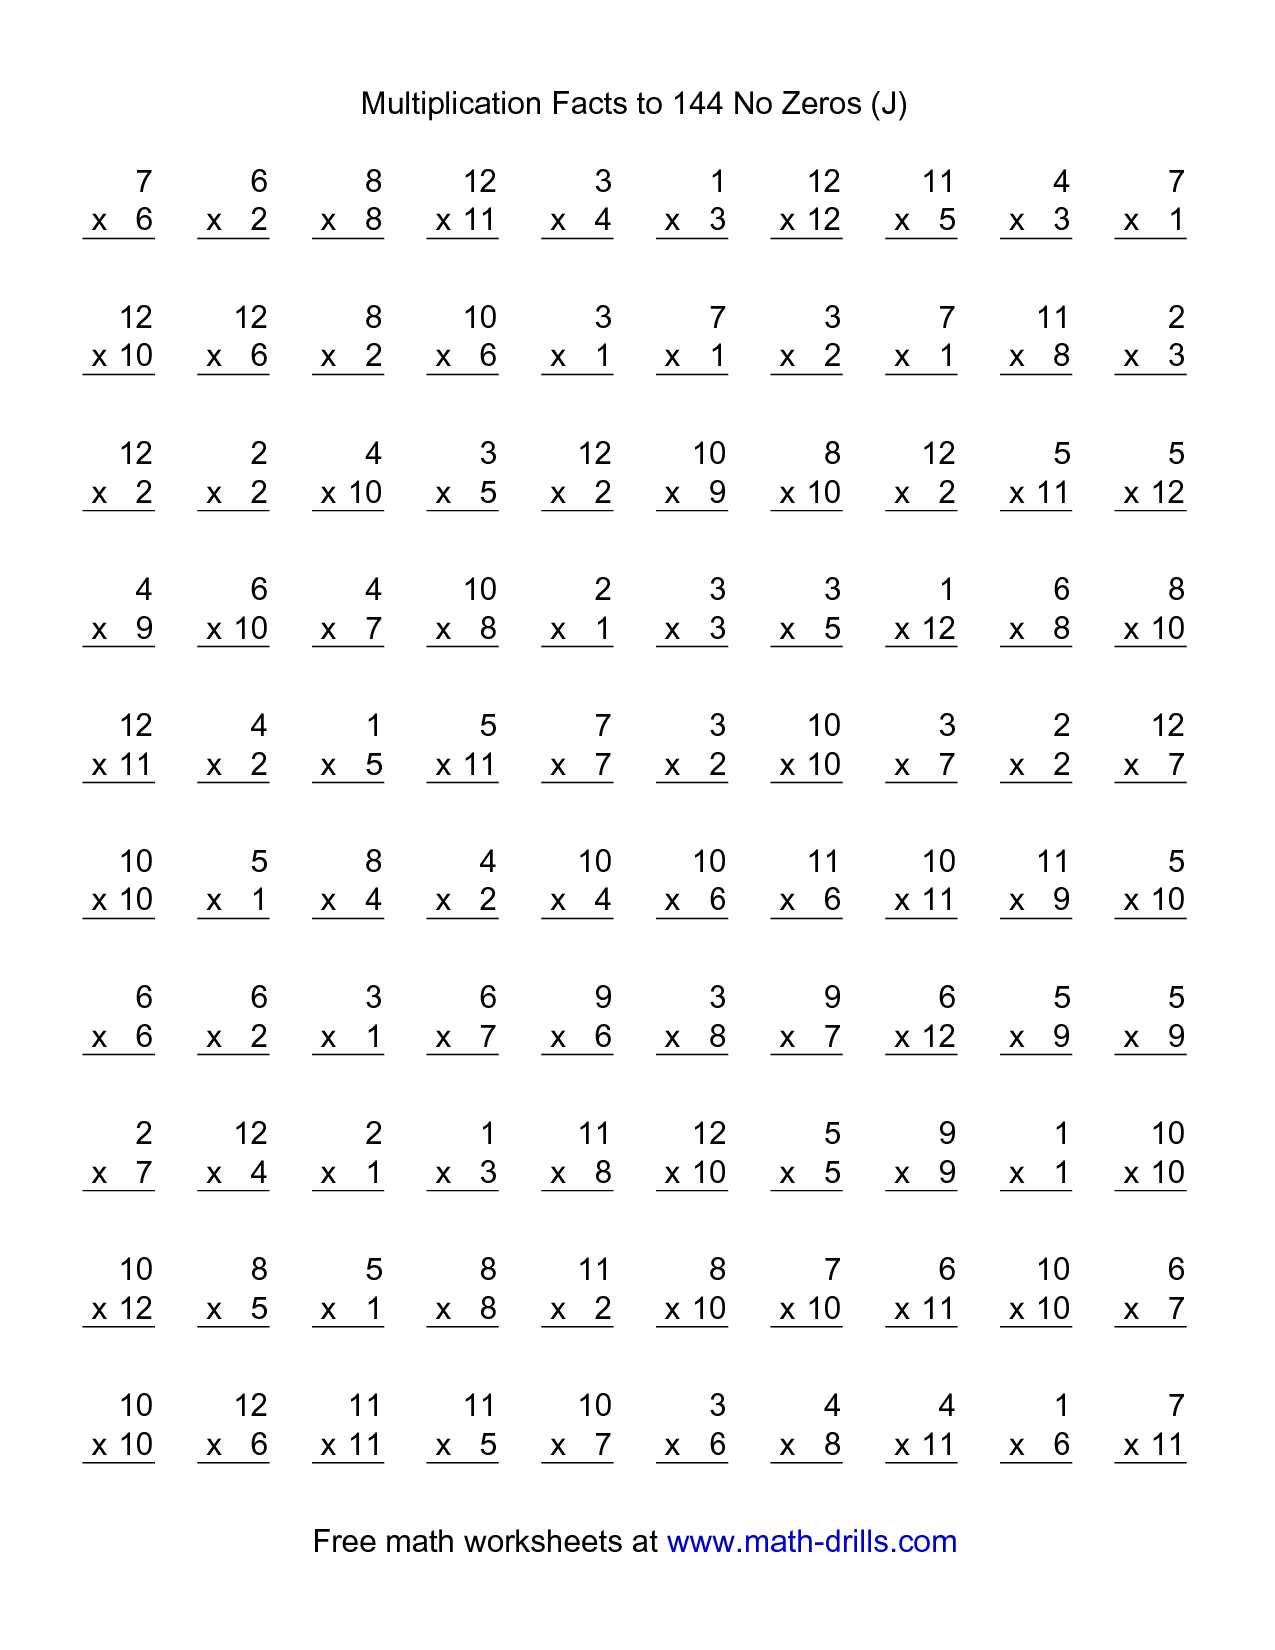 Chess Merit Badge Worksheet and Multiplication Facts Worksheets Free Worksheets for All